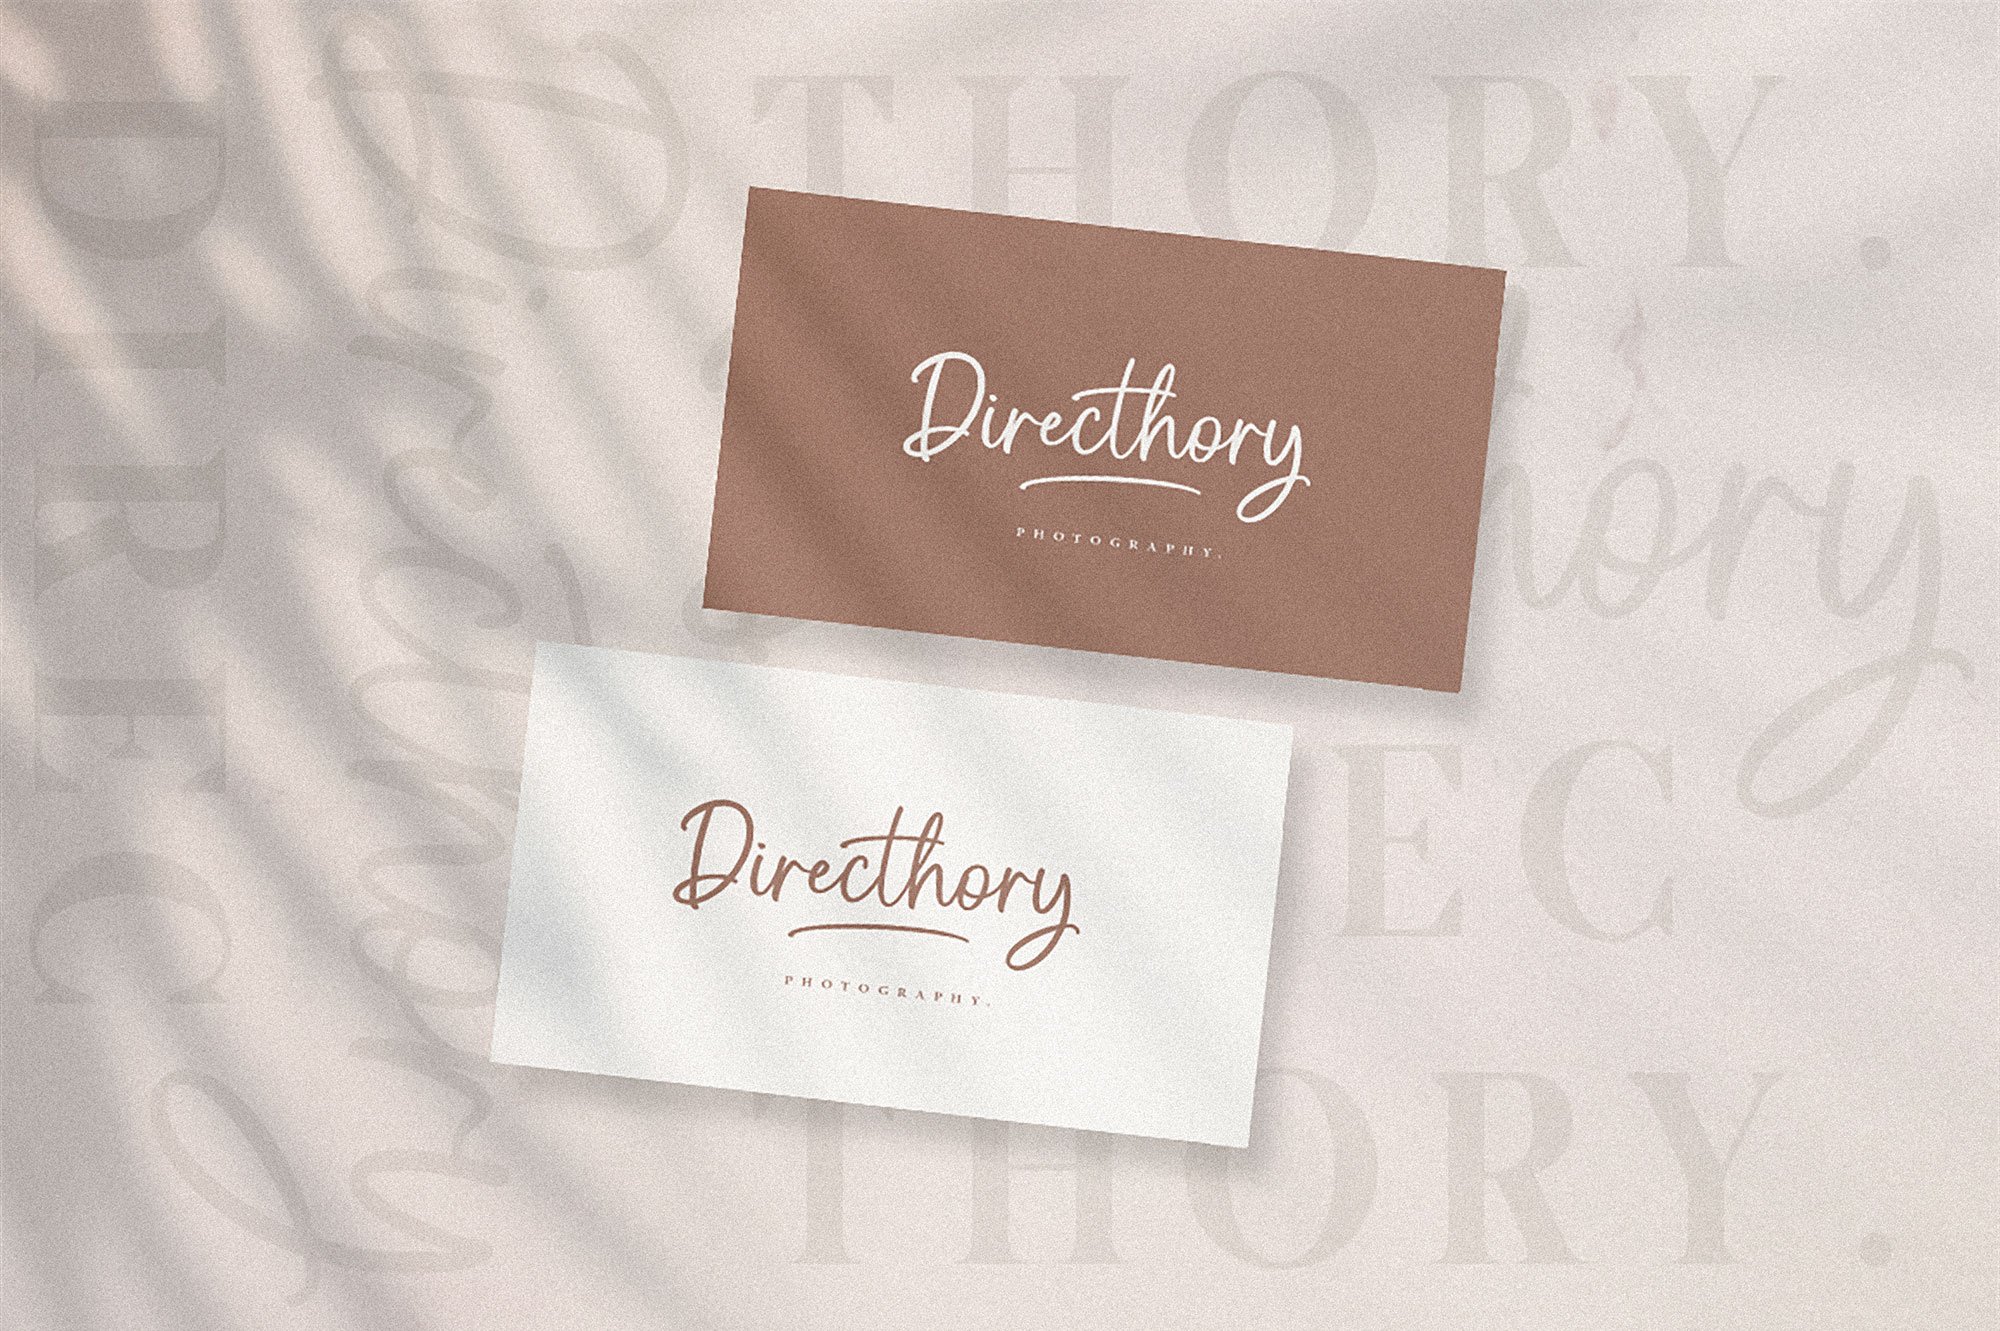 Aurothesia Casual Chic Font Duo